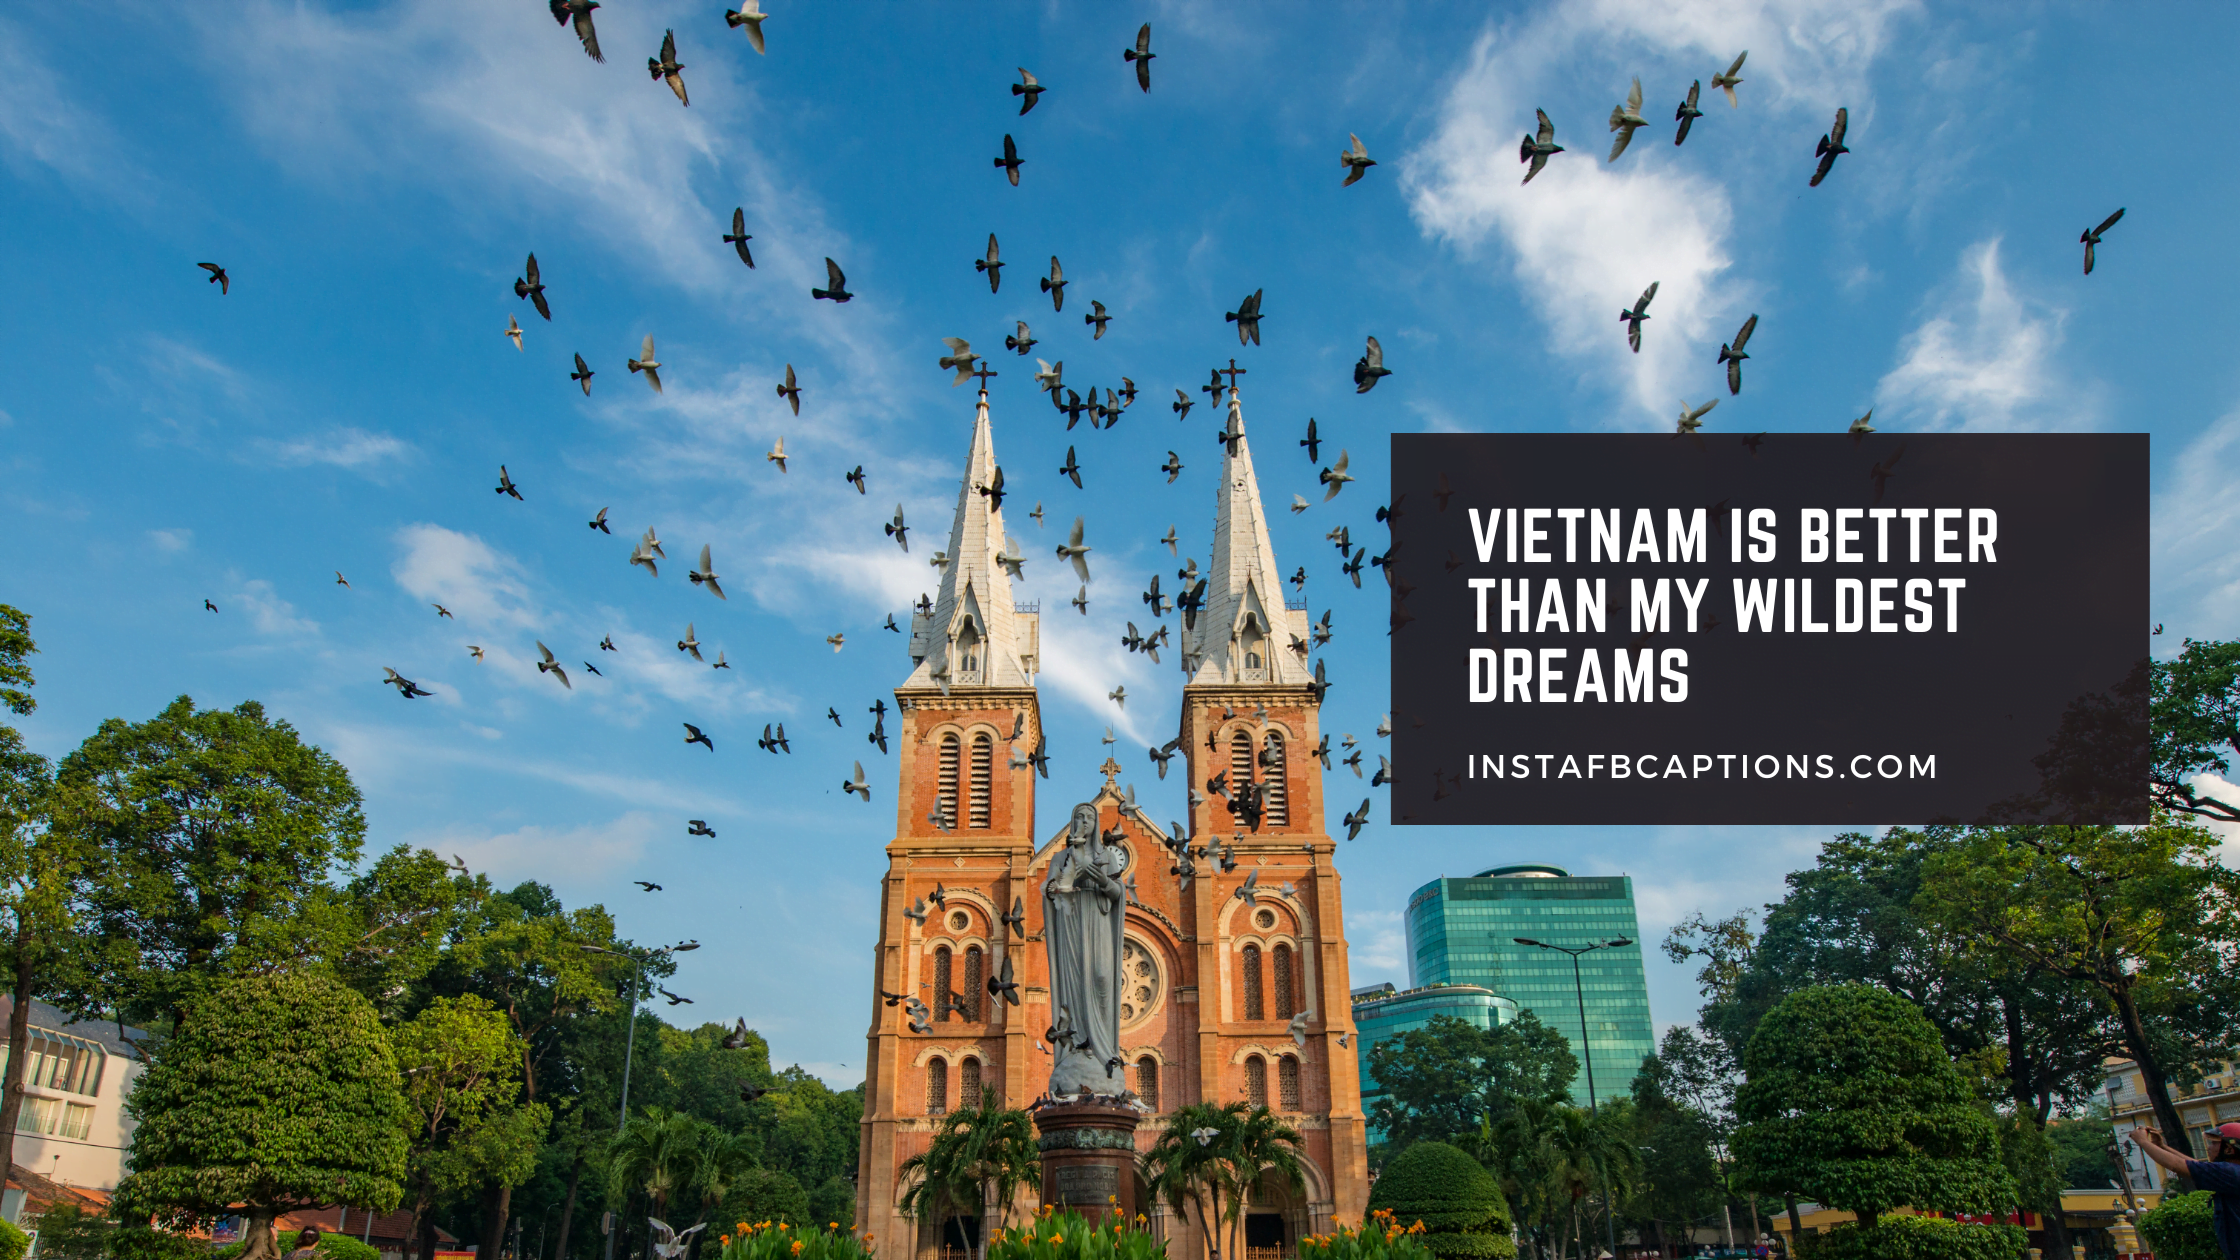 Witty Vietnam Captions  - Witty Vietnam Captions  - Vietnam Instagram Captions for Tasty Food in 2022